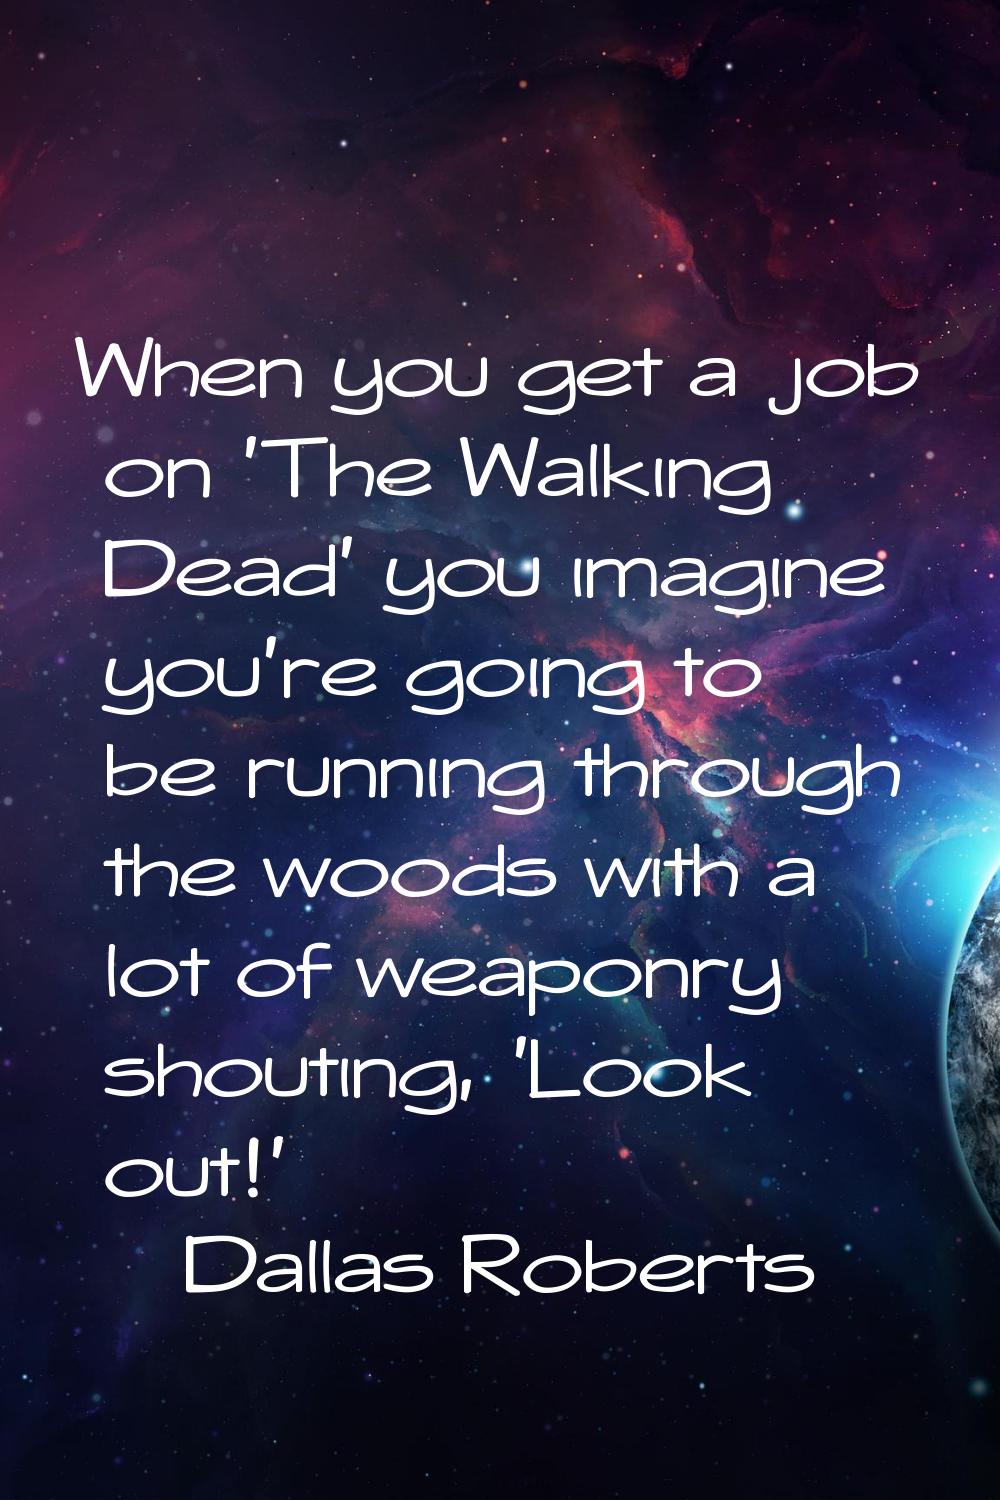 When you get a job on 'The Walking Dead' you imagine you're going to be running through the woods w